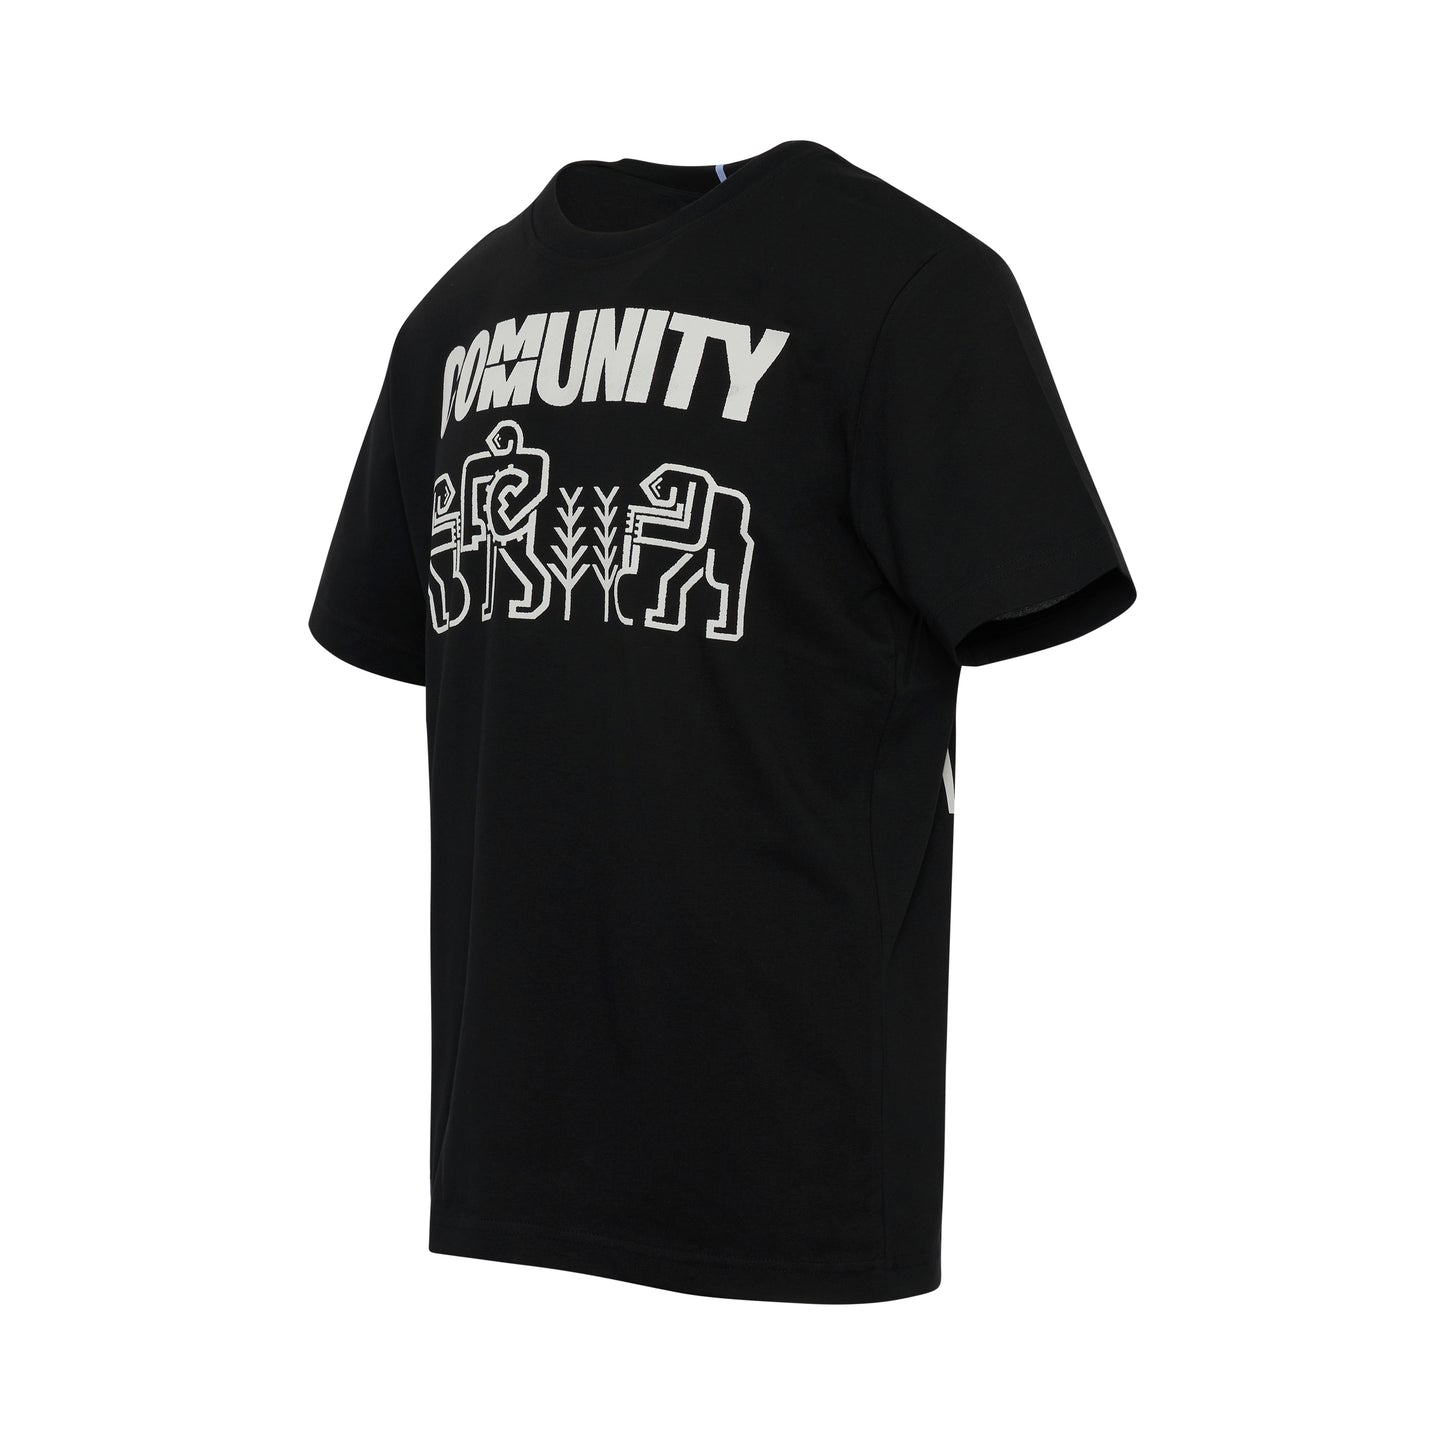 Community Relaxed T-Shirt in Black